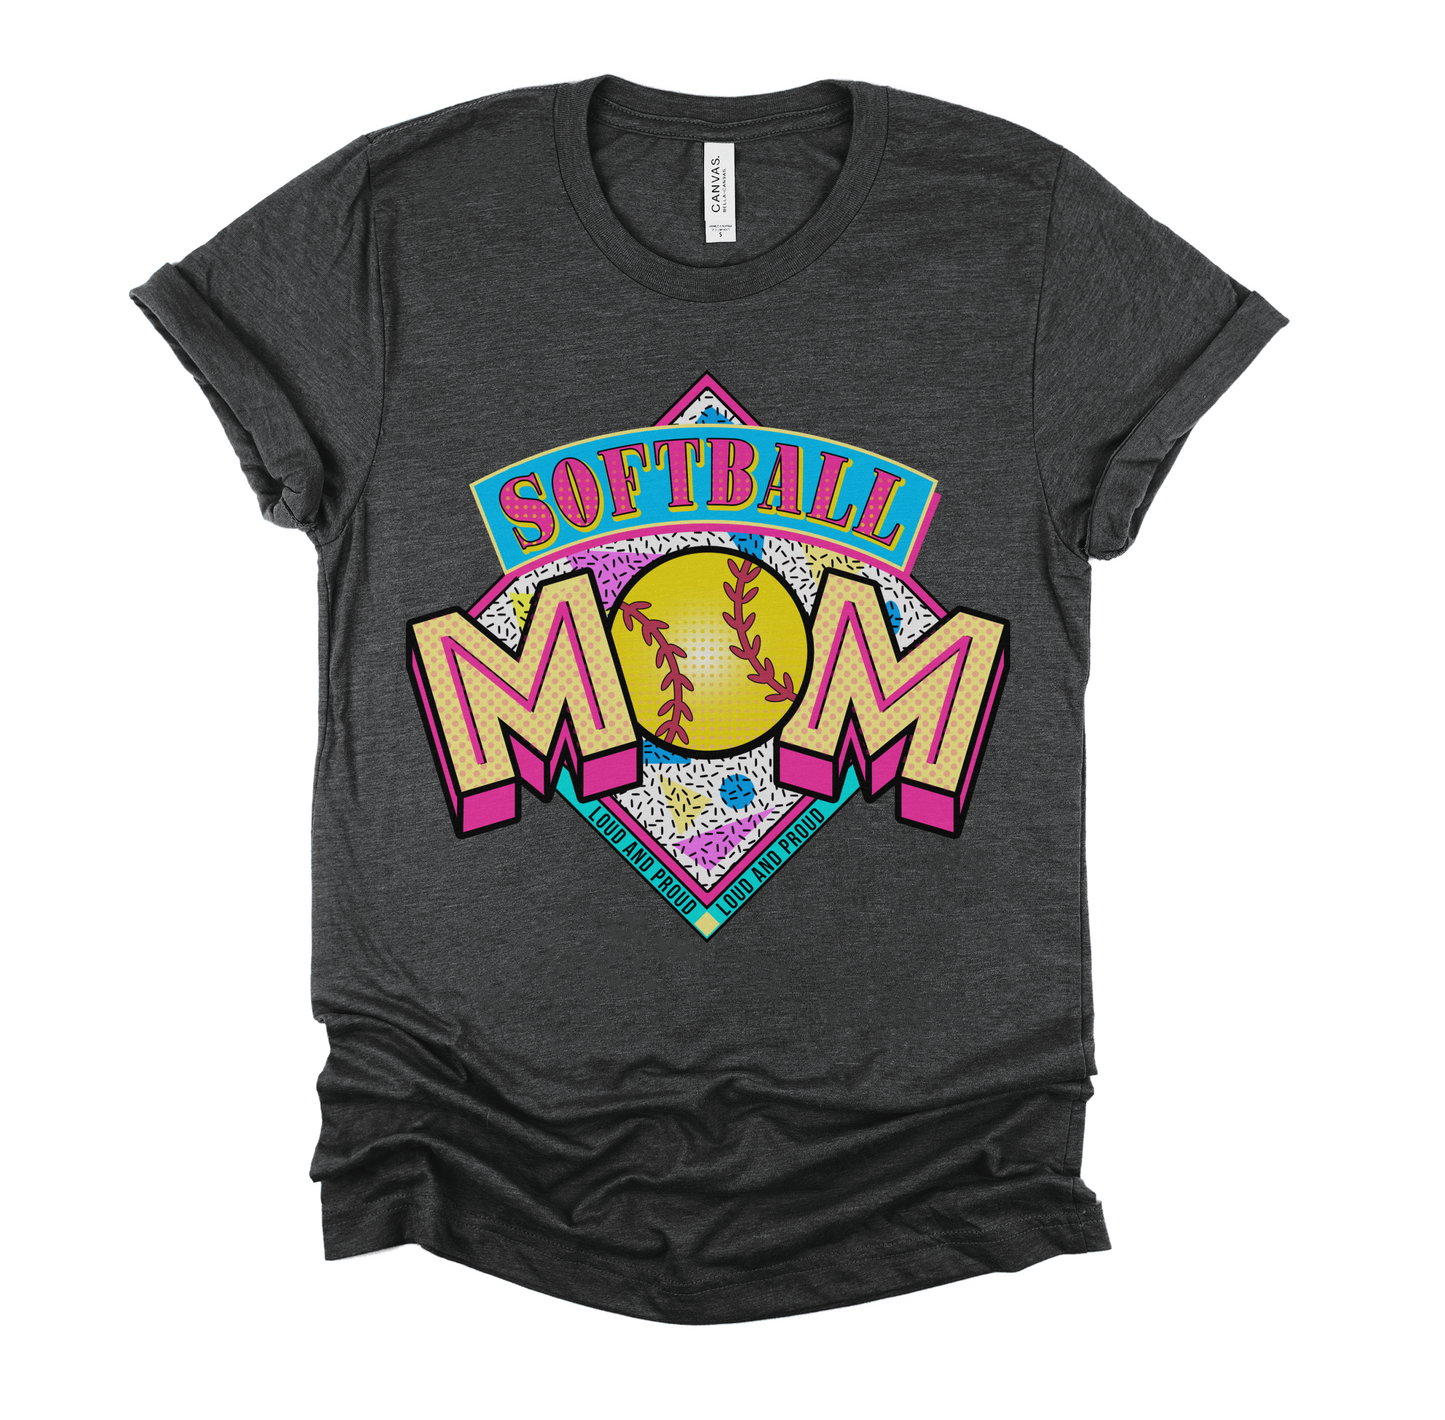 Comfort Colors or Bella Canvas Soft Style Softball Mom Tee/ Super Cute Dyed Tees - Unisex Sized/ SoftballLife